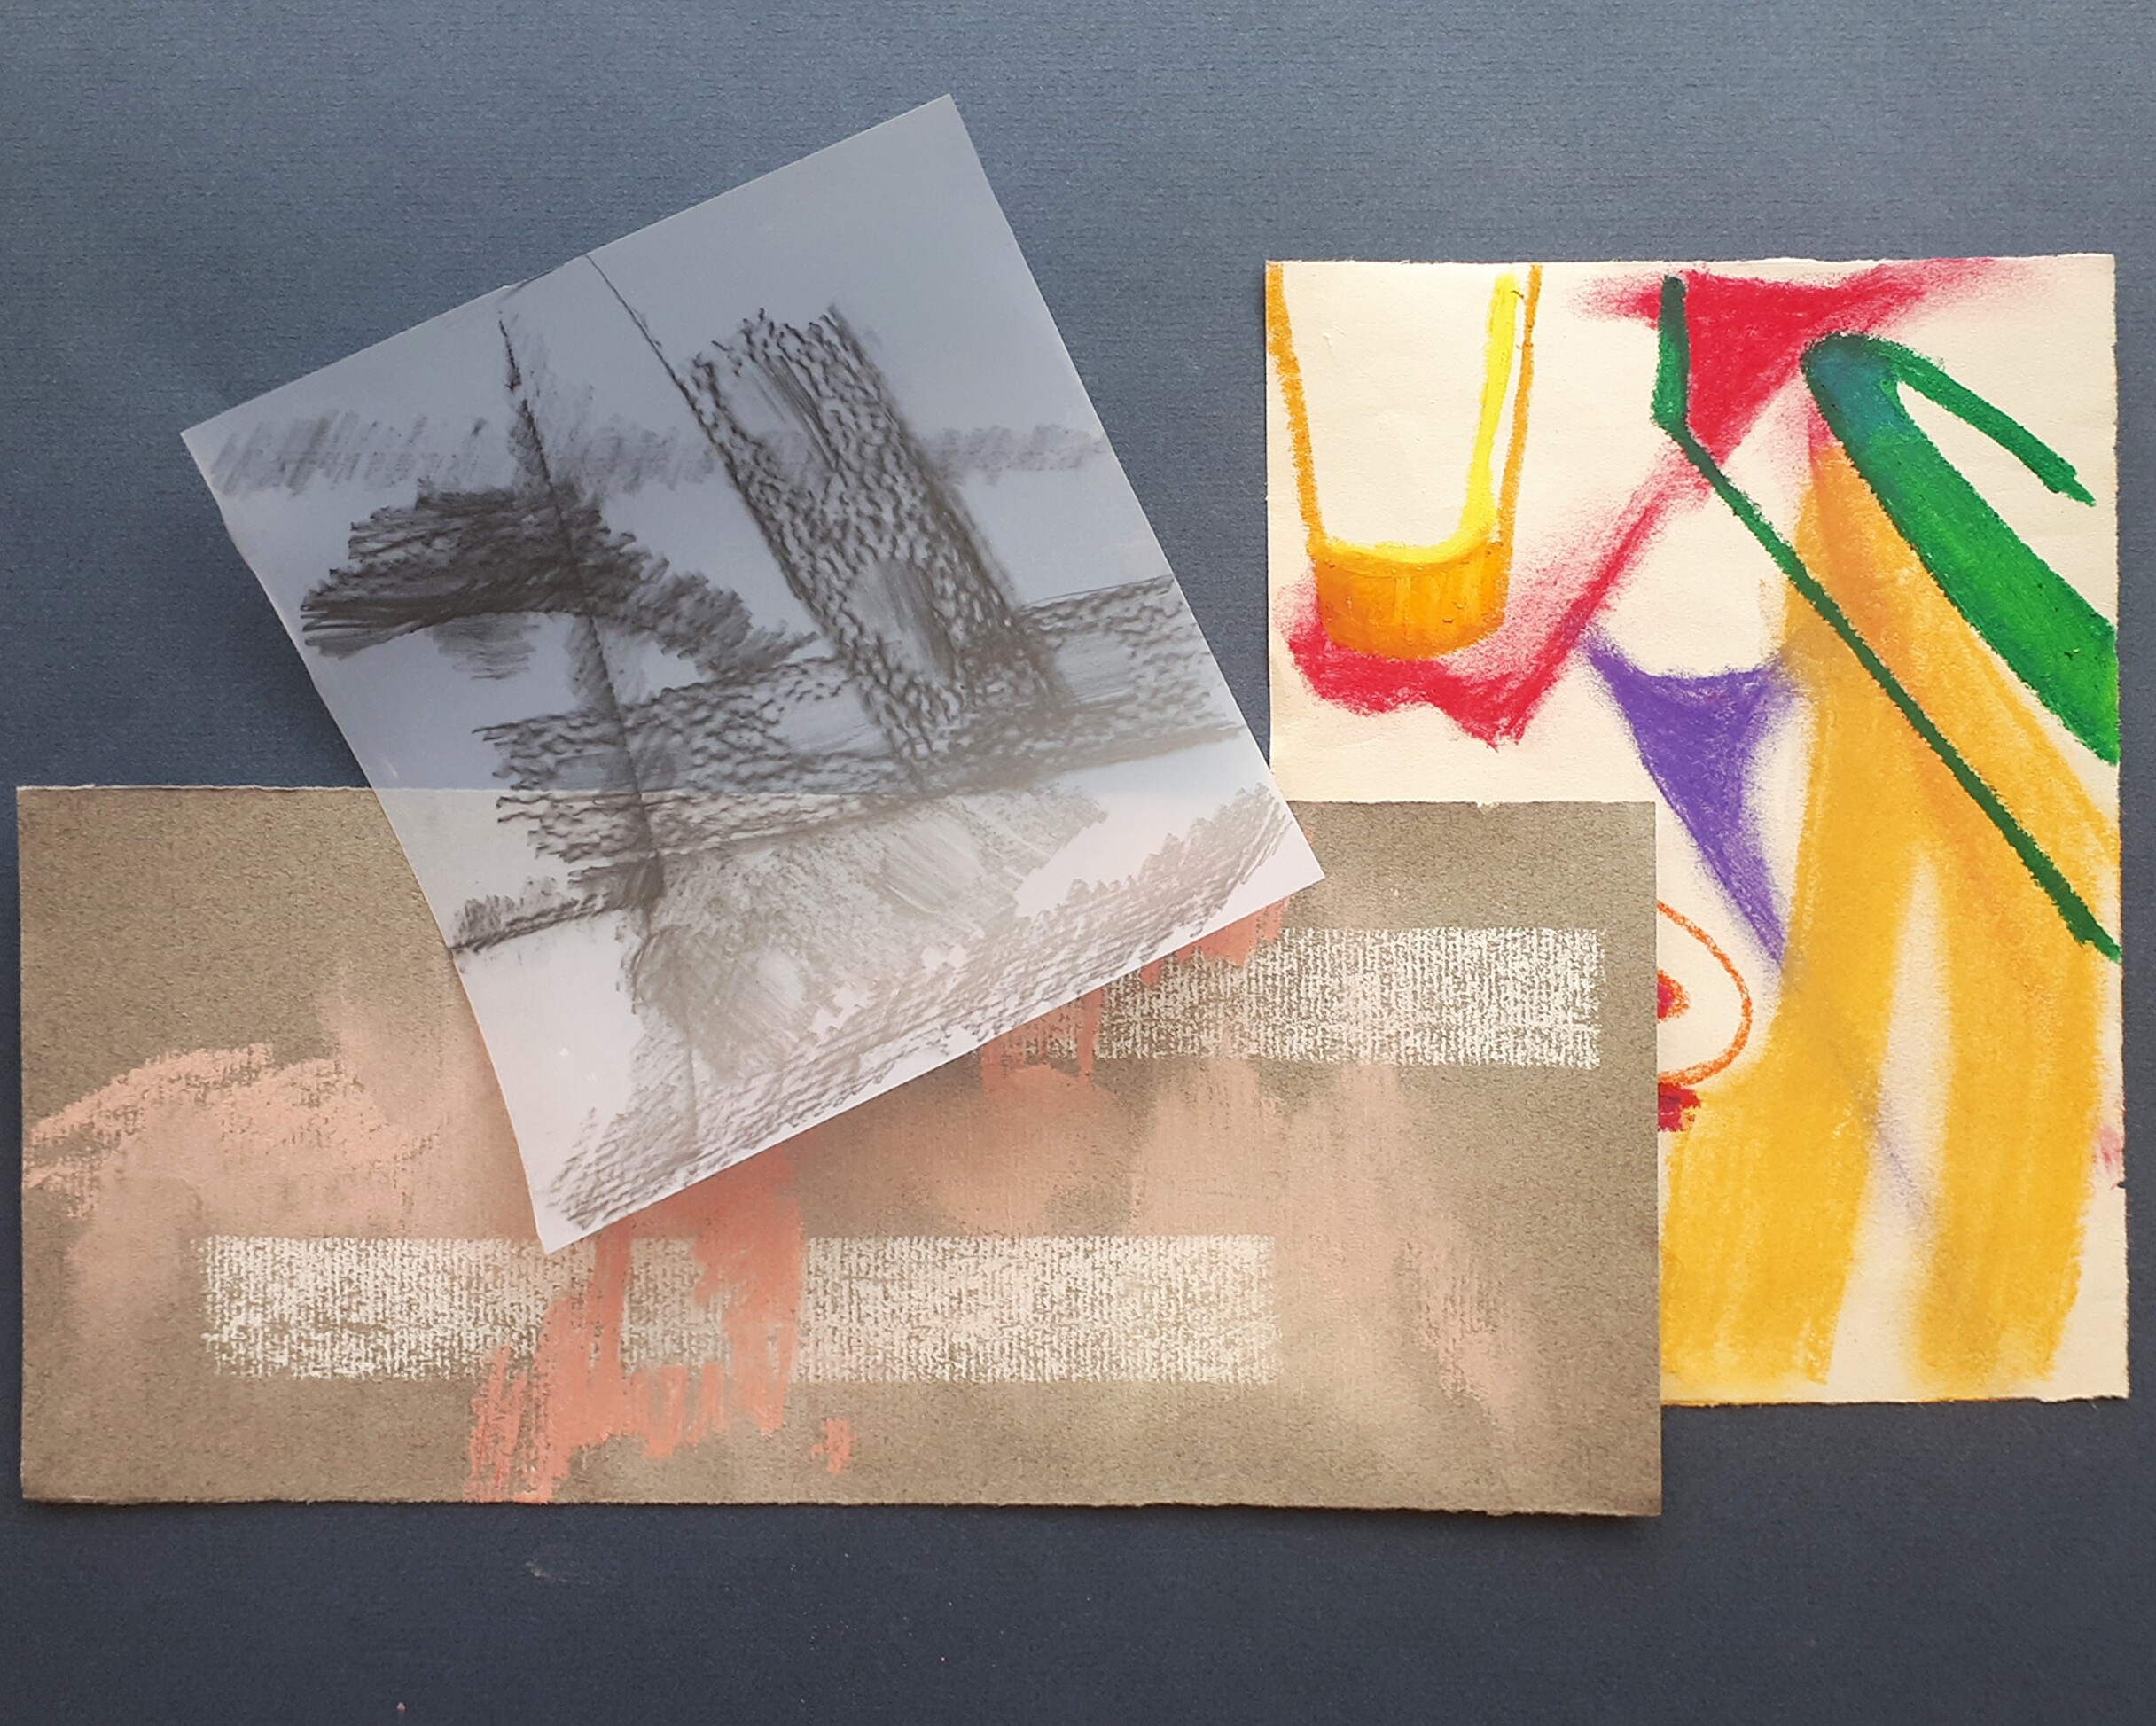 A set of three drawings on paper and vellum arranged on a dark grey table surface